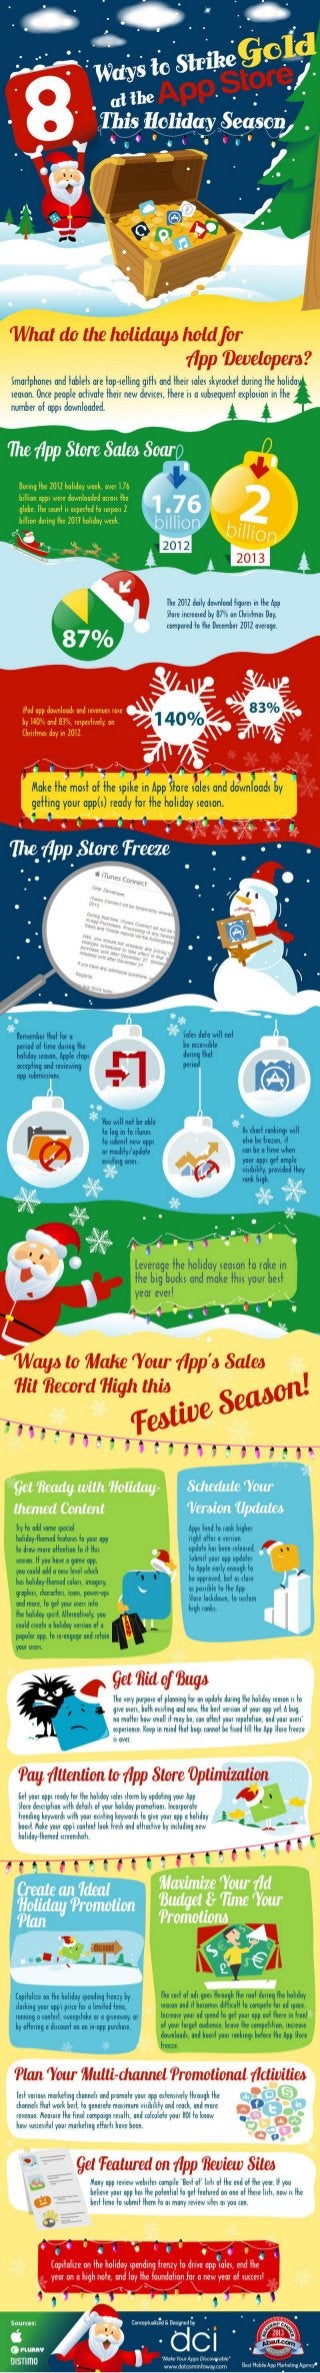 Infographic 8-ways-to-strike-gold-at-the-app-store-this-holiday-season